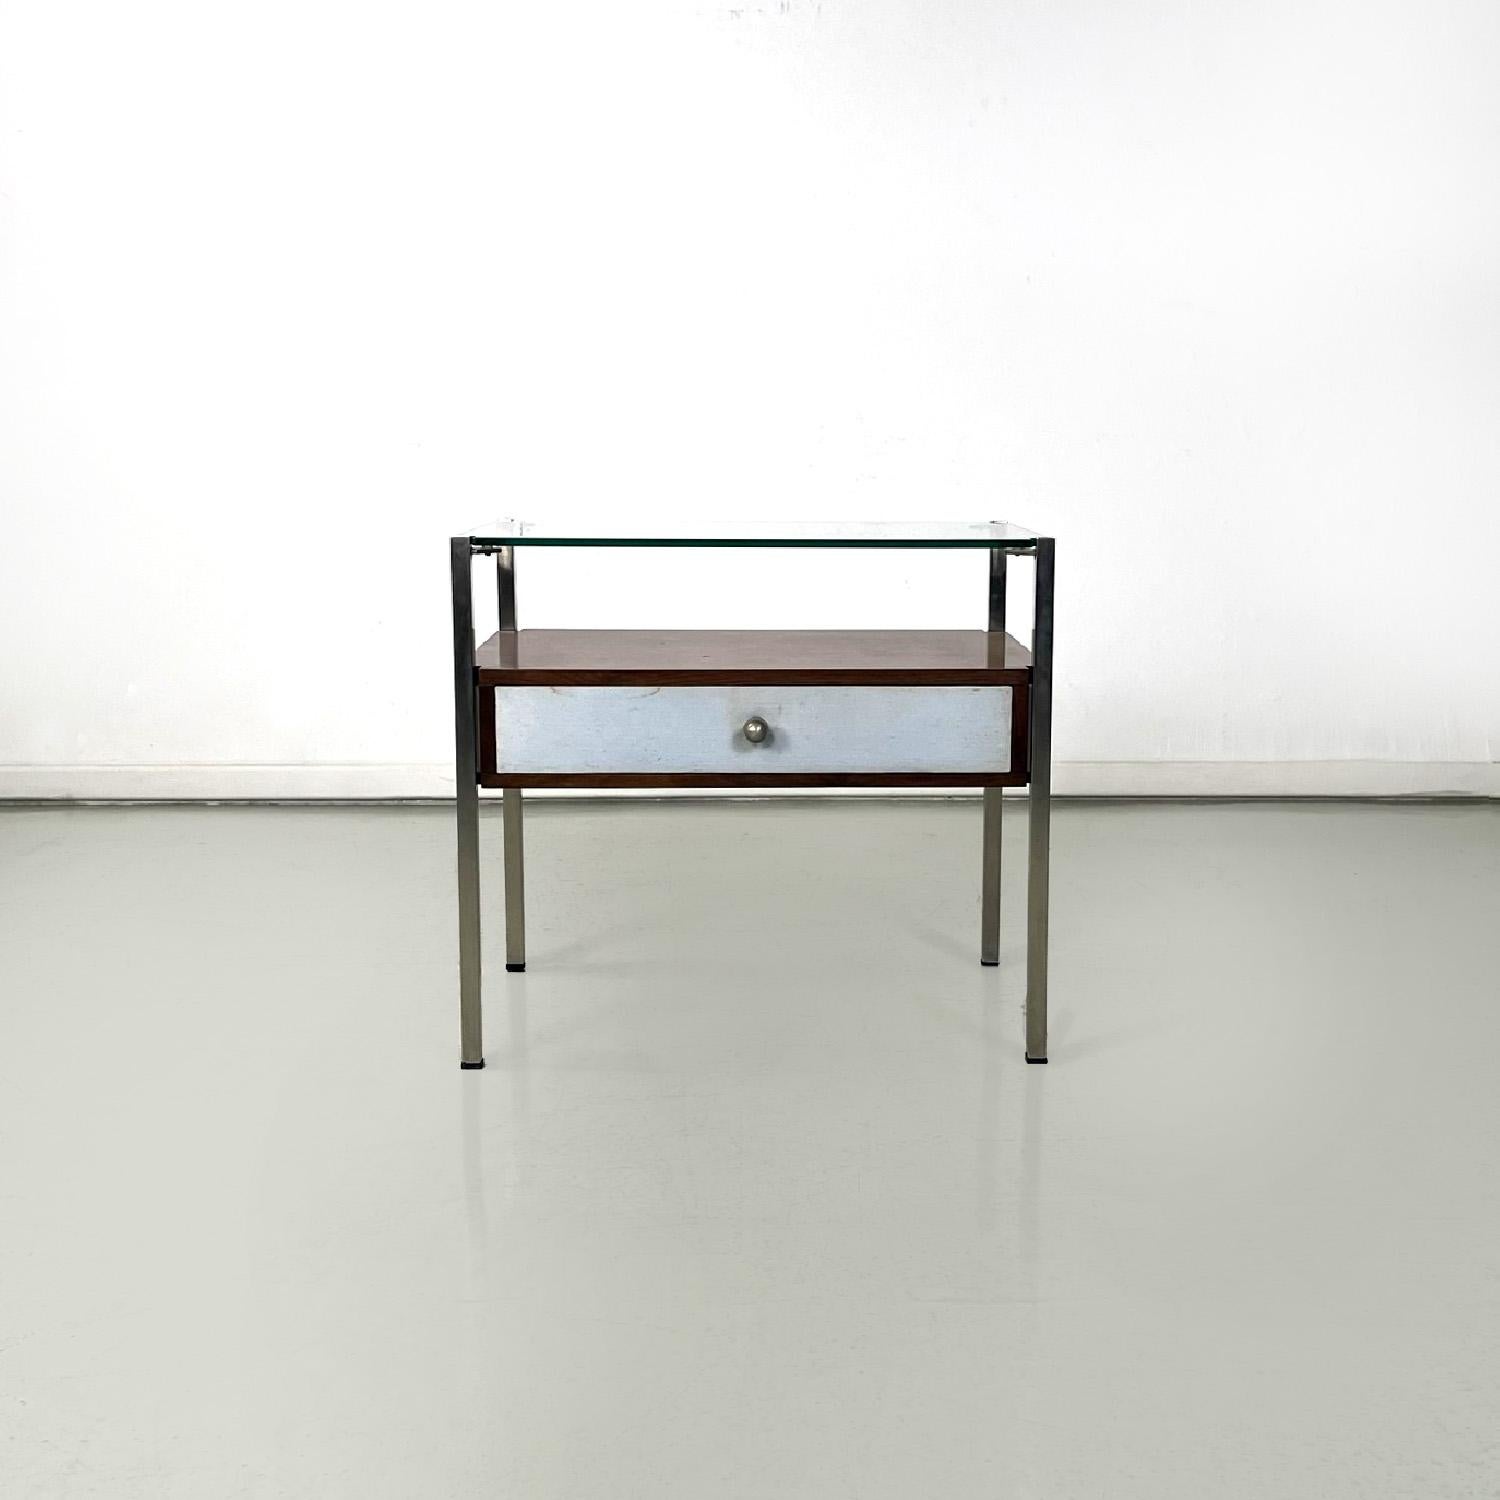 Italian modern glass metal wood and light blue fabric bedside tables, 1970s
Pair of rectangular bedside tables. The structure is made of metal with a square section, the upper surface is made of glass. The lower shelf is a wooden structure with a